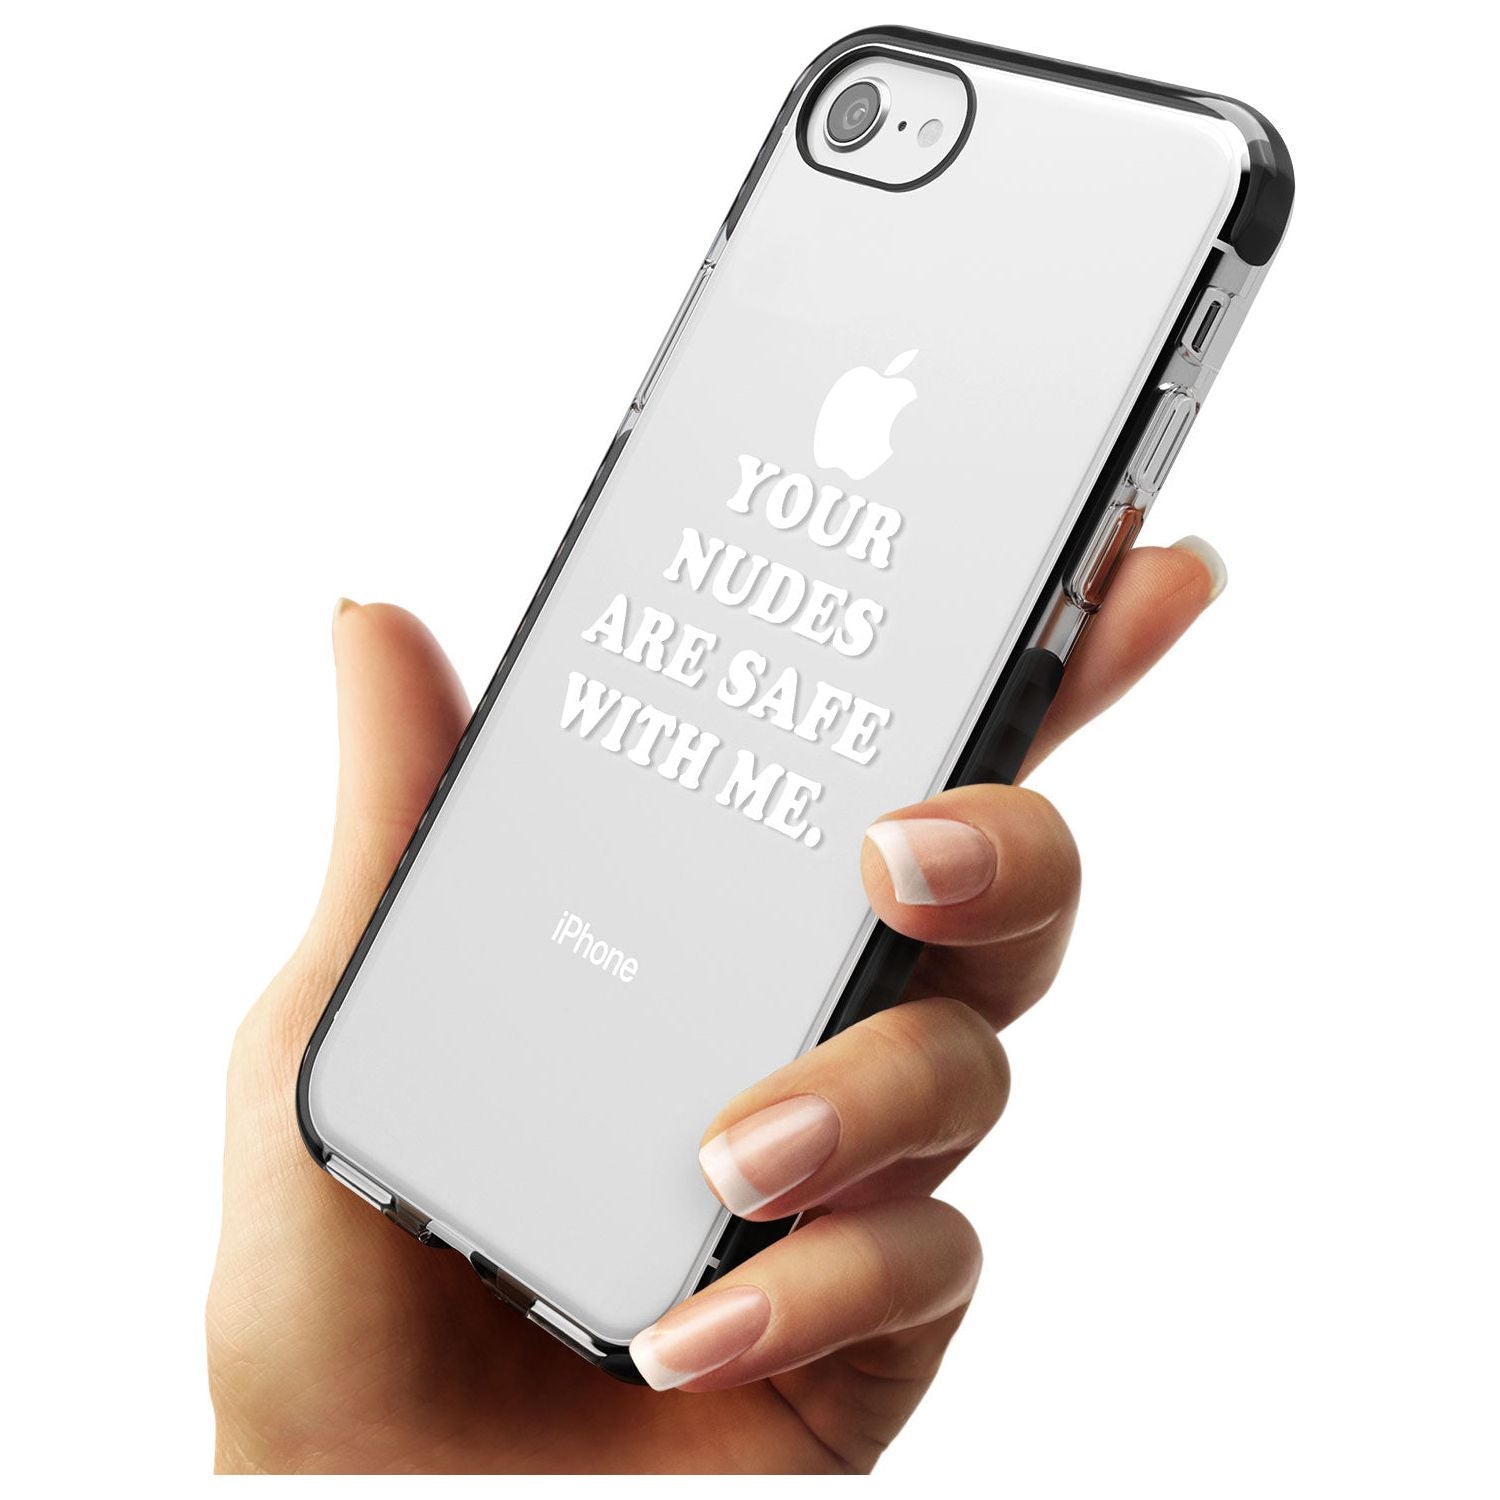 Your nudes are safe with me... WHITE Black Impact Phone Case for iPhone SE 8 7 Plus